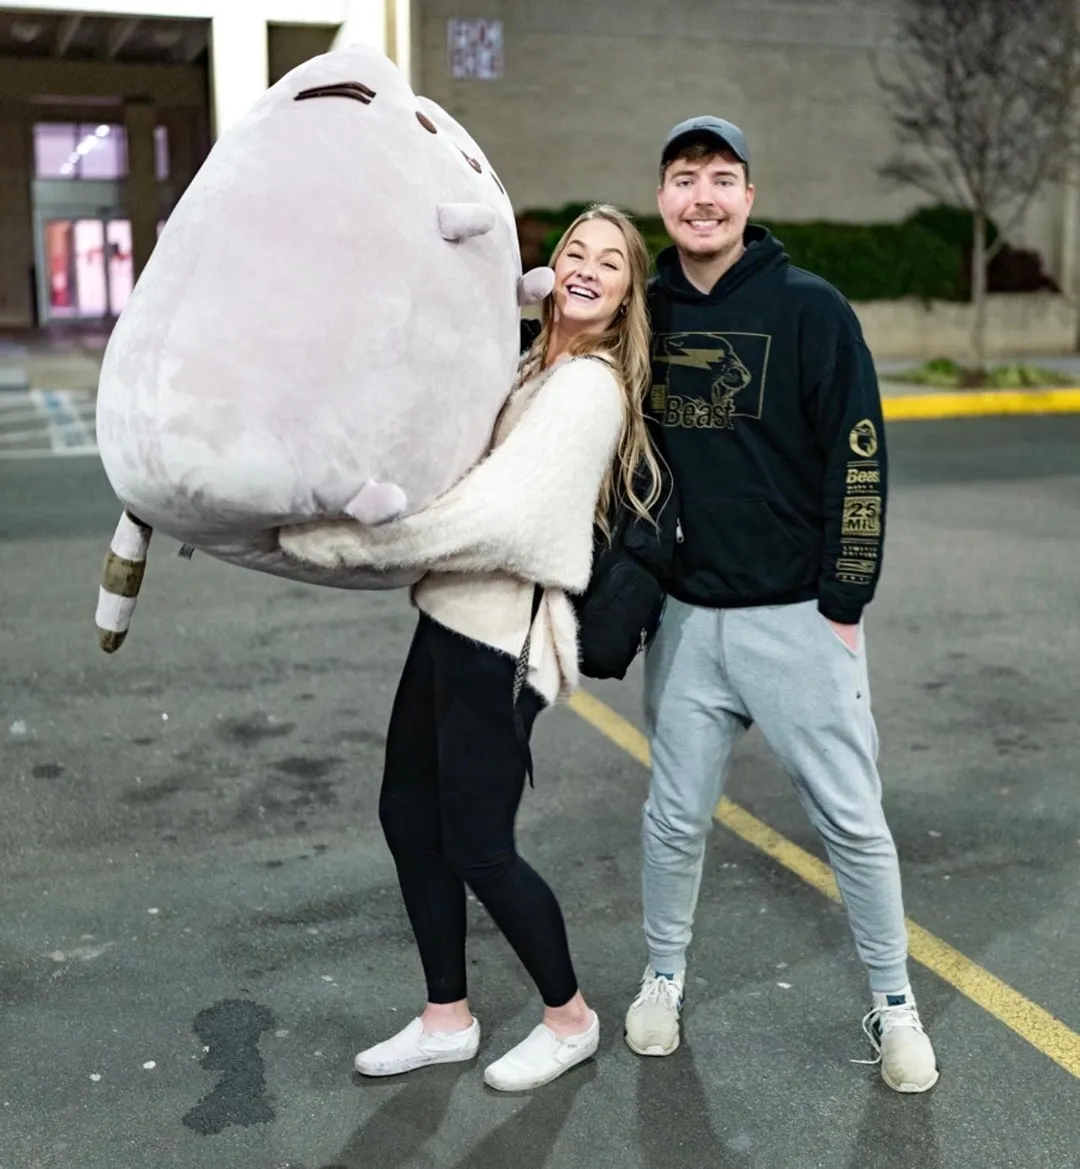 MrBeast with his former girlfriend Maddy Spidell